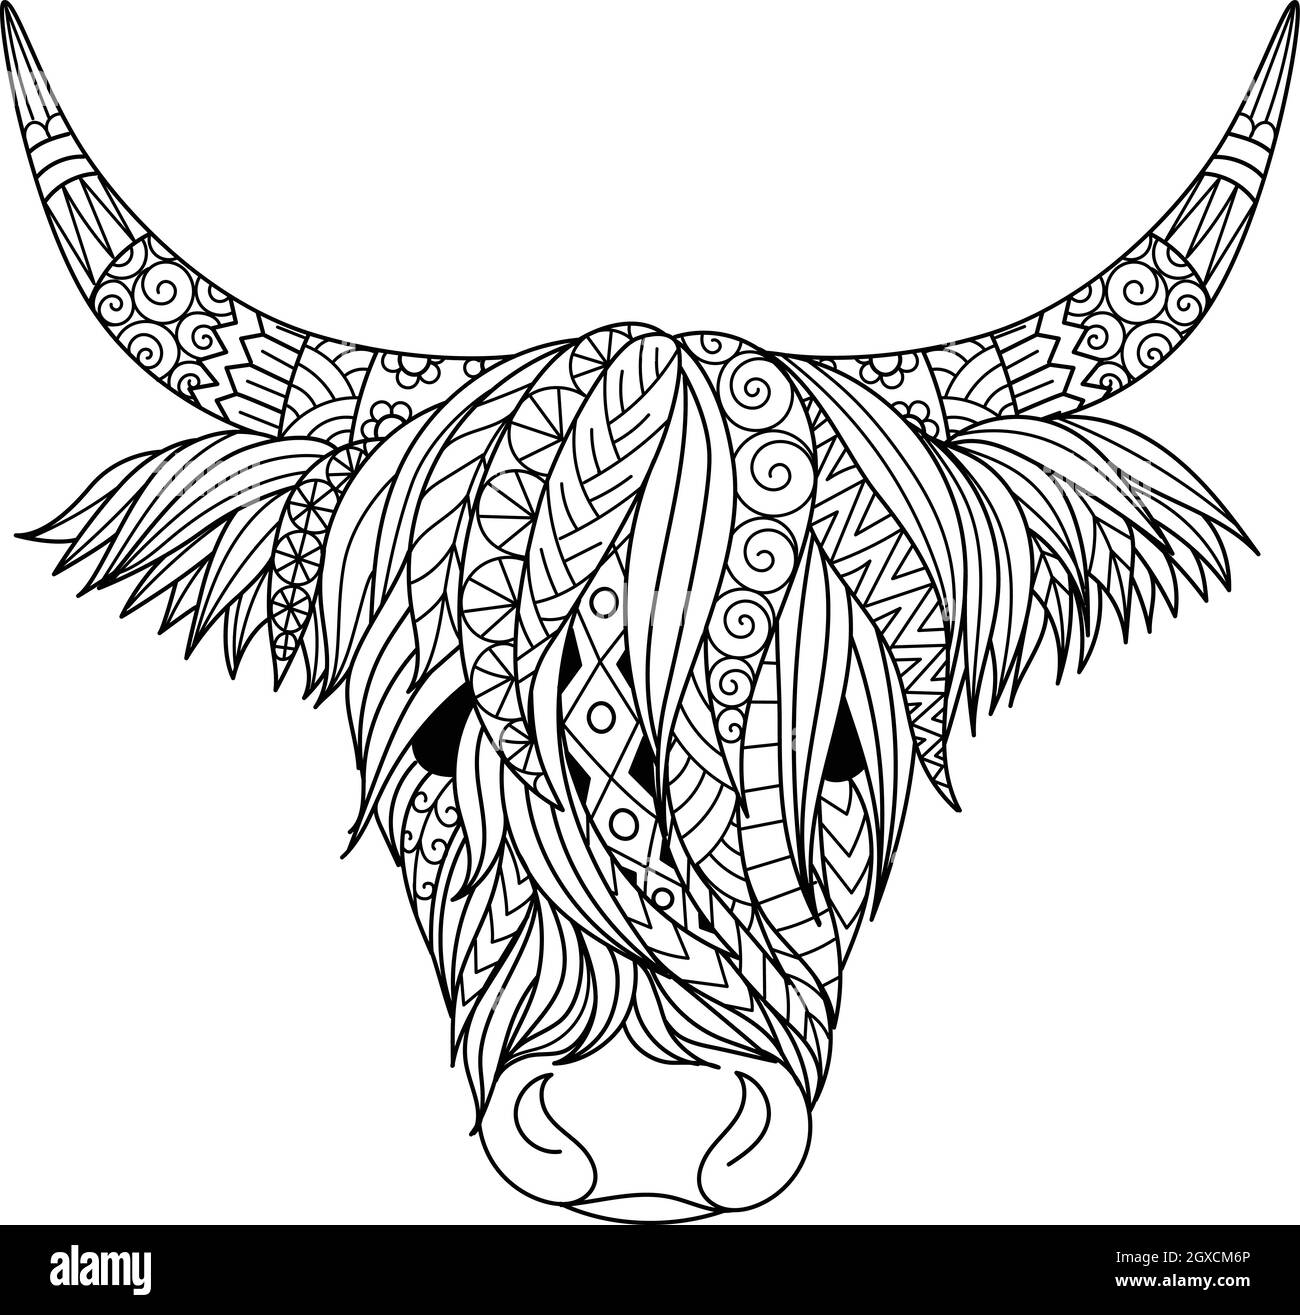 Highland cow design for coloring book,coloring page, t shirt design and so on. Vector illustration Stock Vector